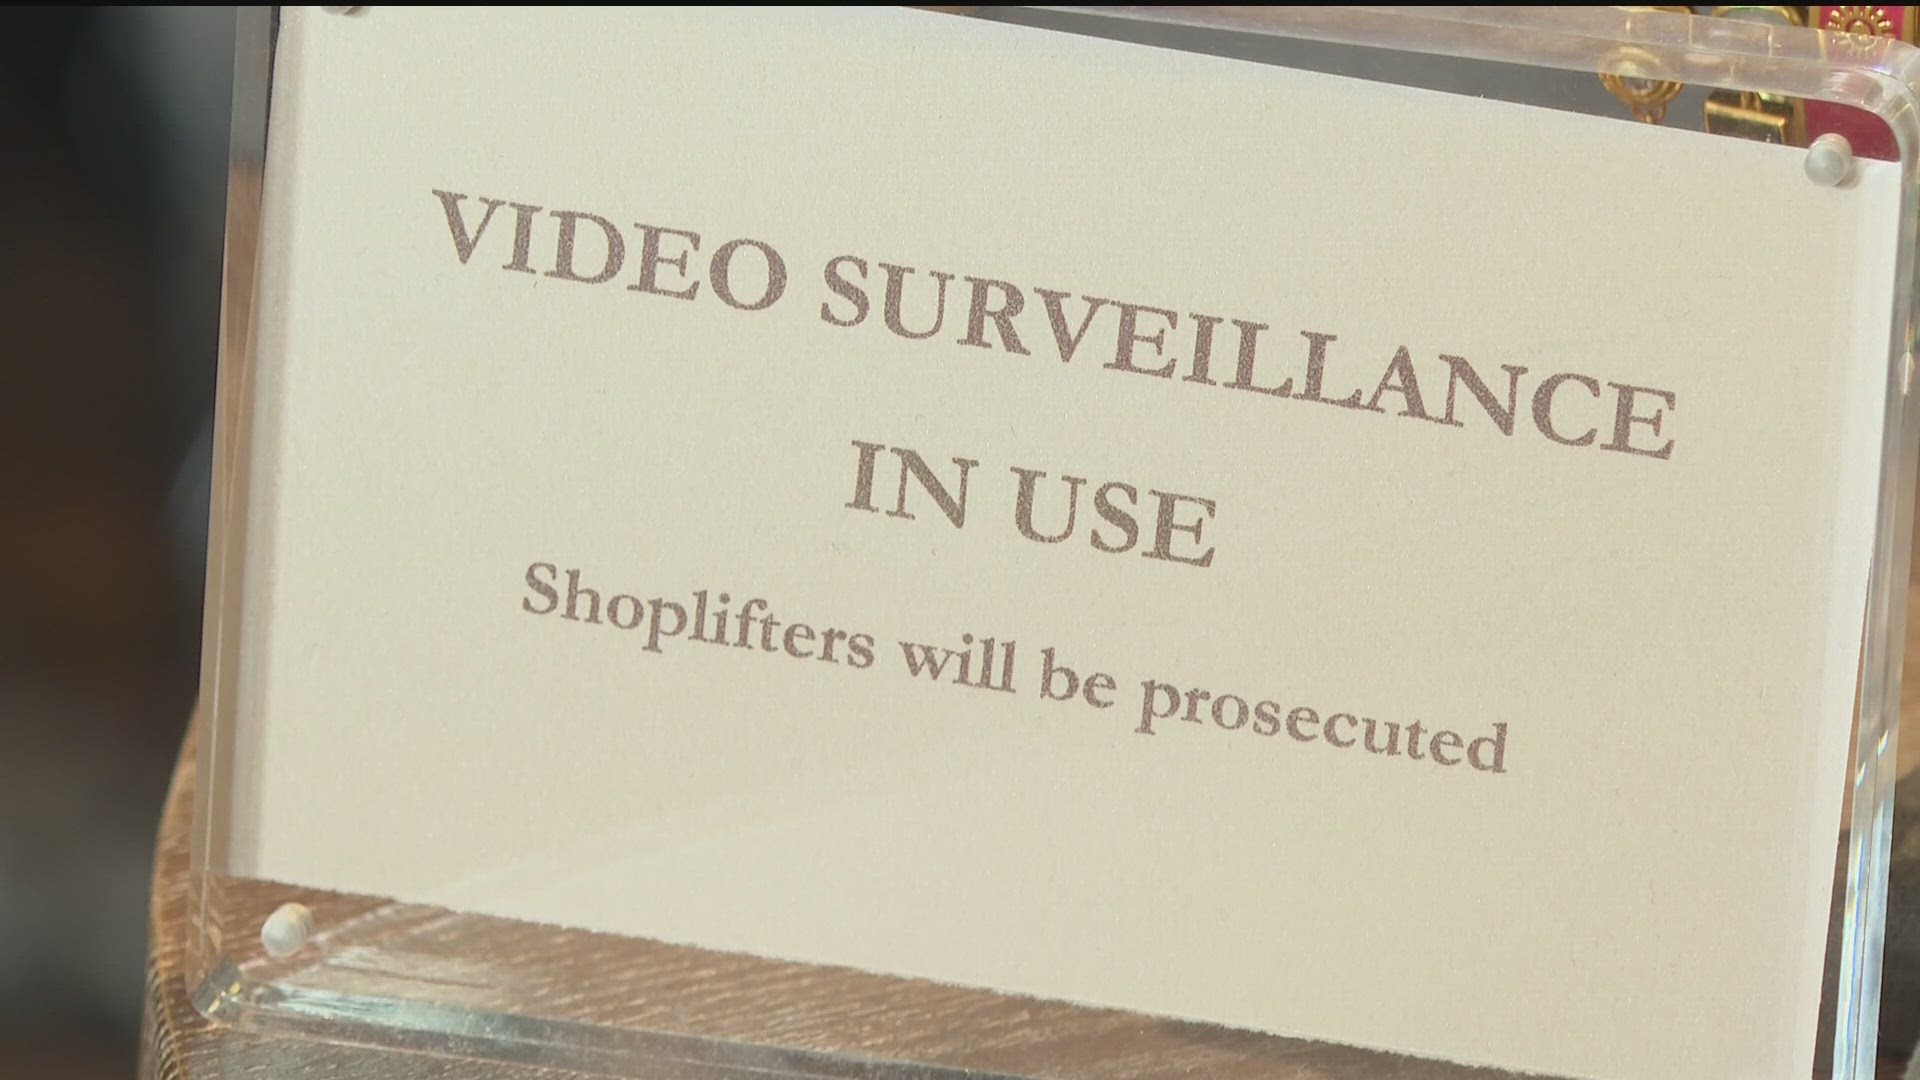 Small businesses are hit hard - but major stores are seeing an increased in thefts too.